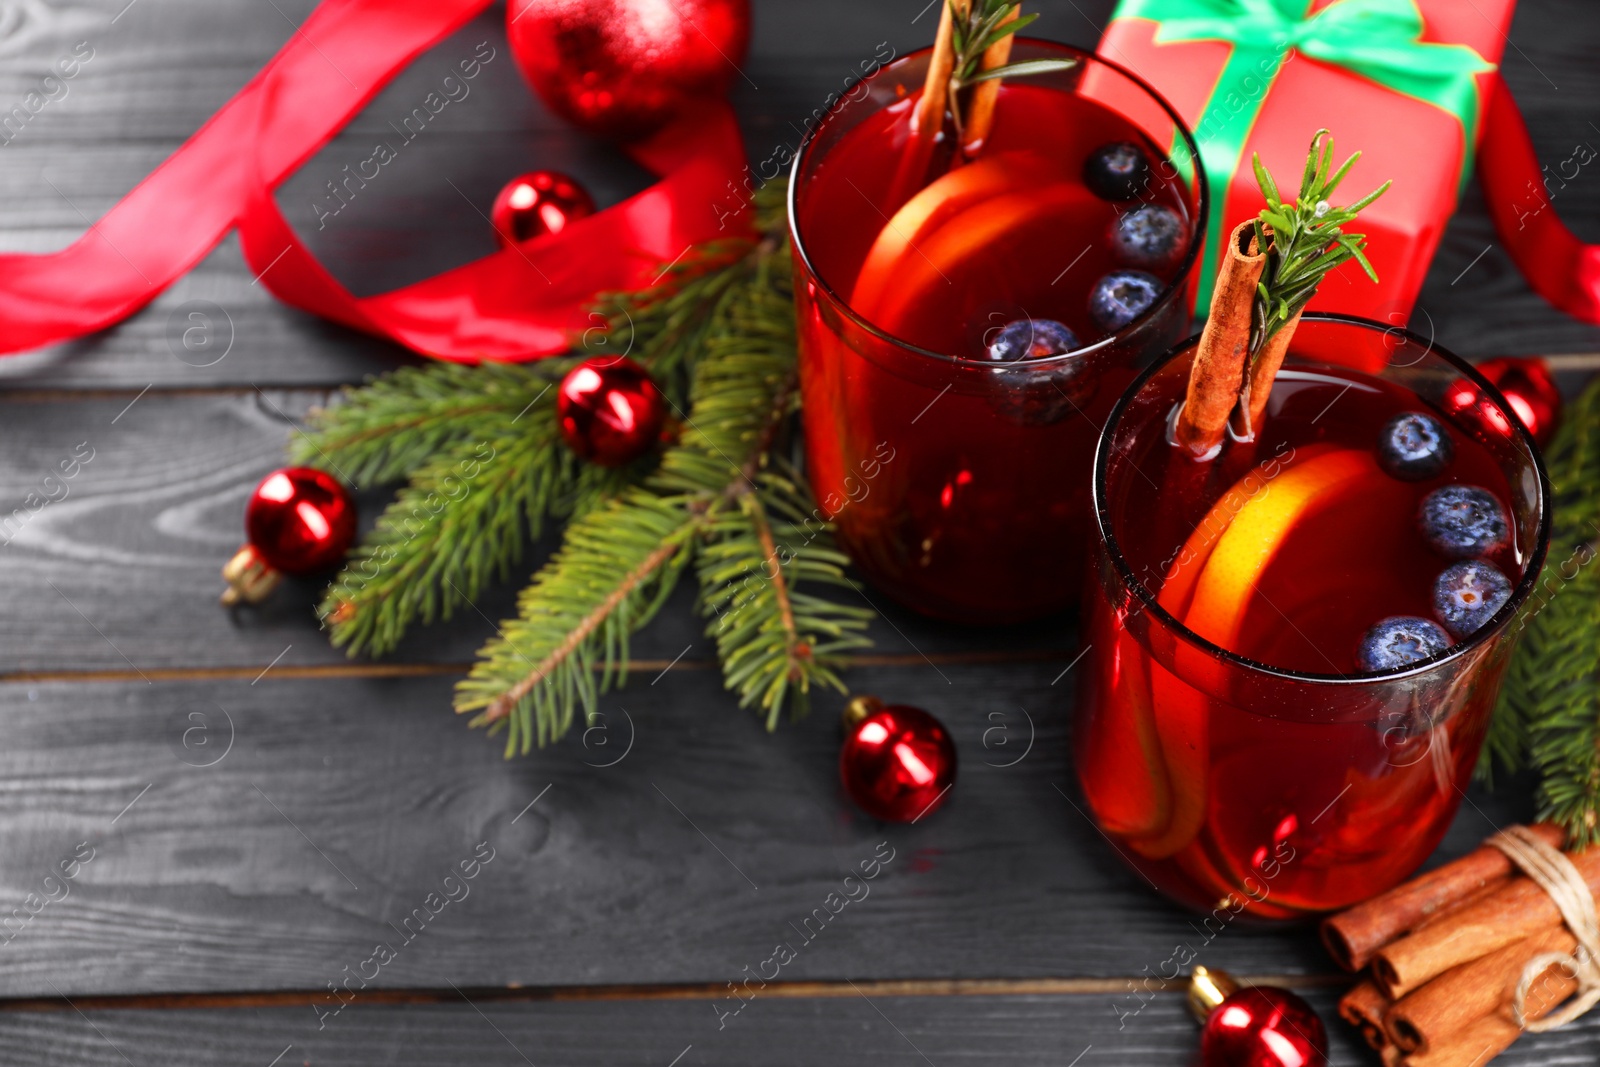 Photo of Aromatic Sangria drink in glasses, ingredients and Christmas decor on black wooden table